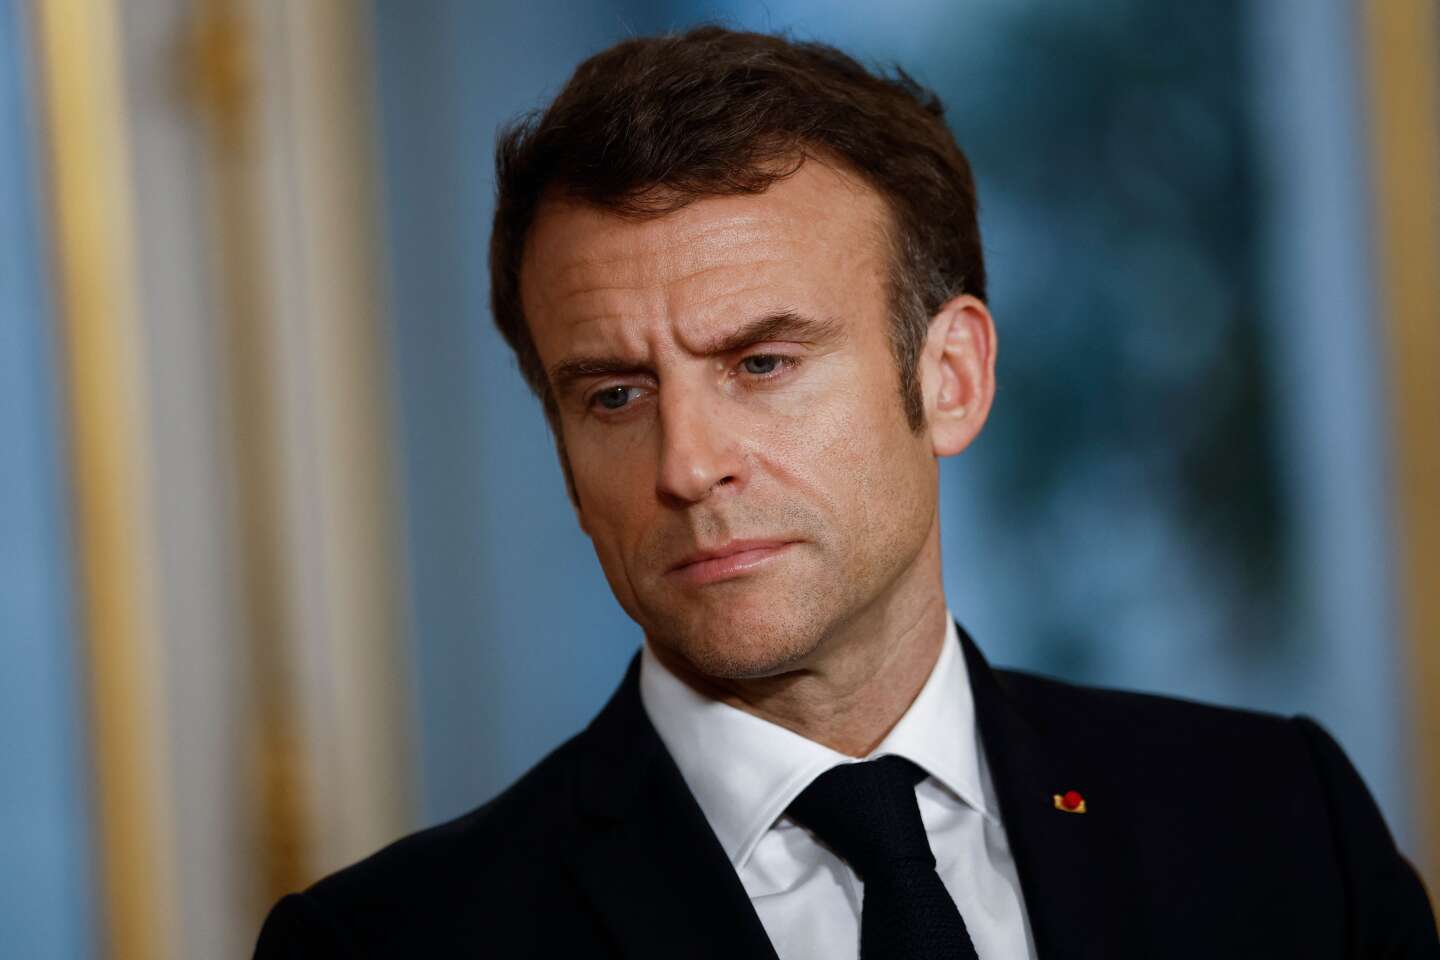 “Macronism, which wanted to be the inventor of a new world, today uses the techniques of the old world”